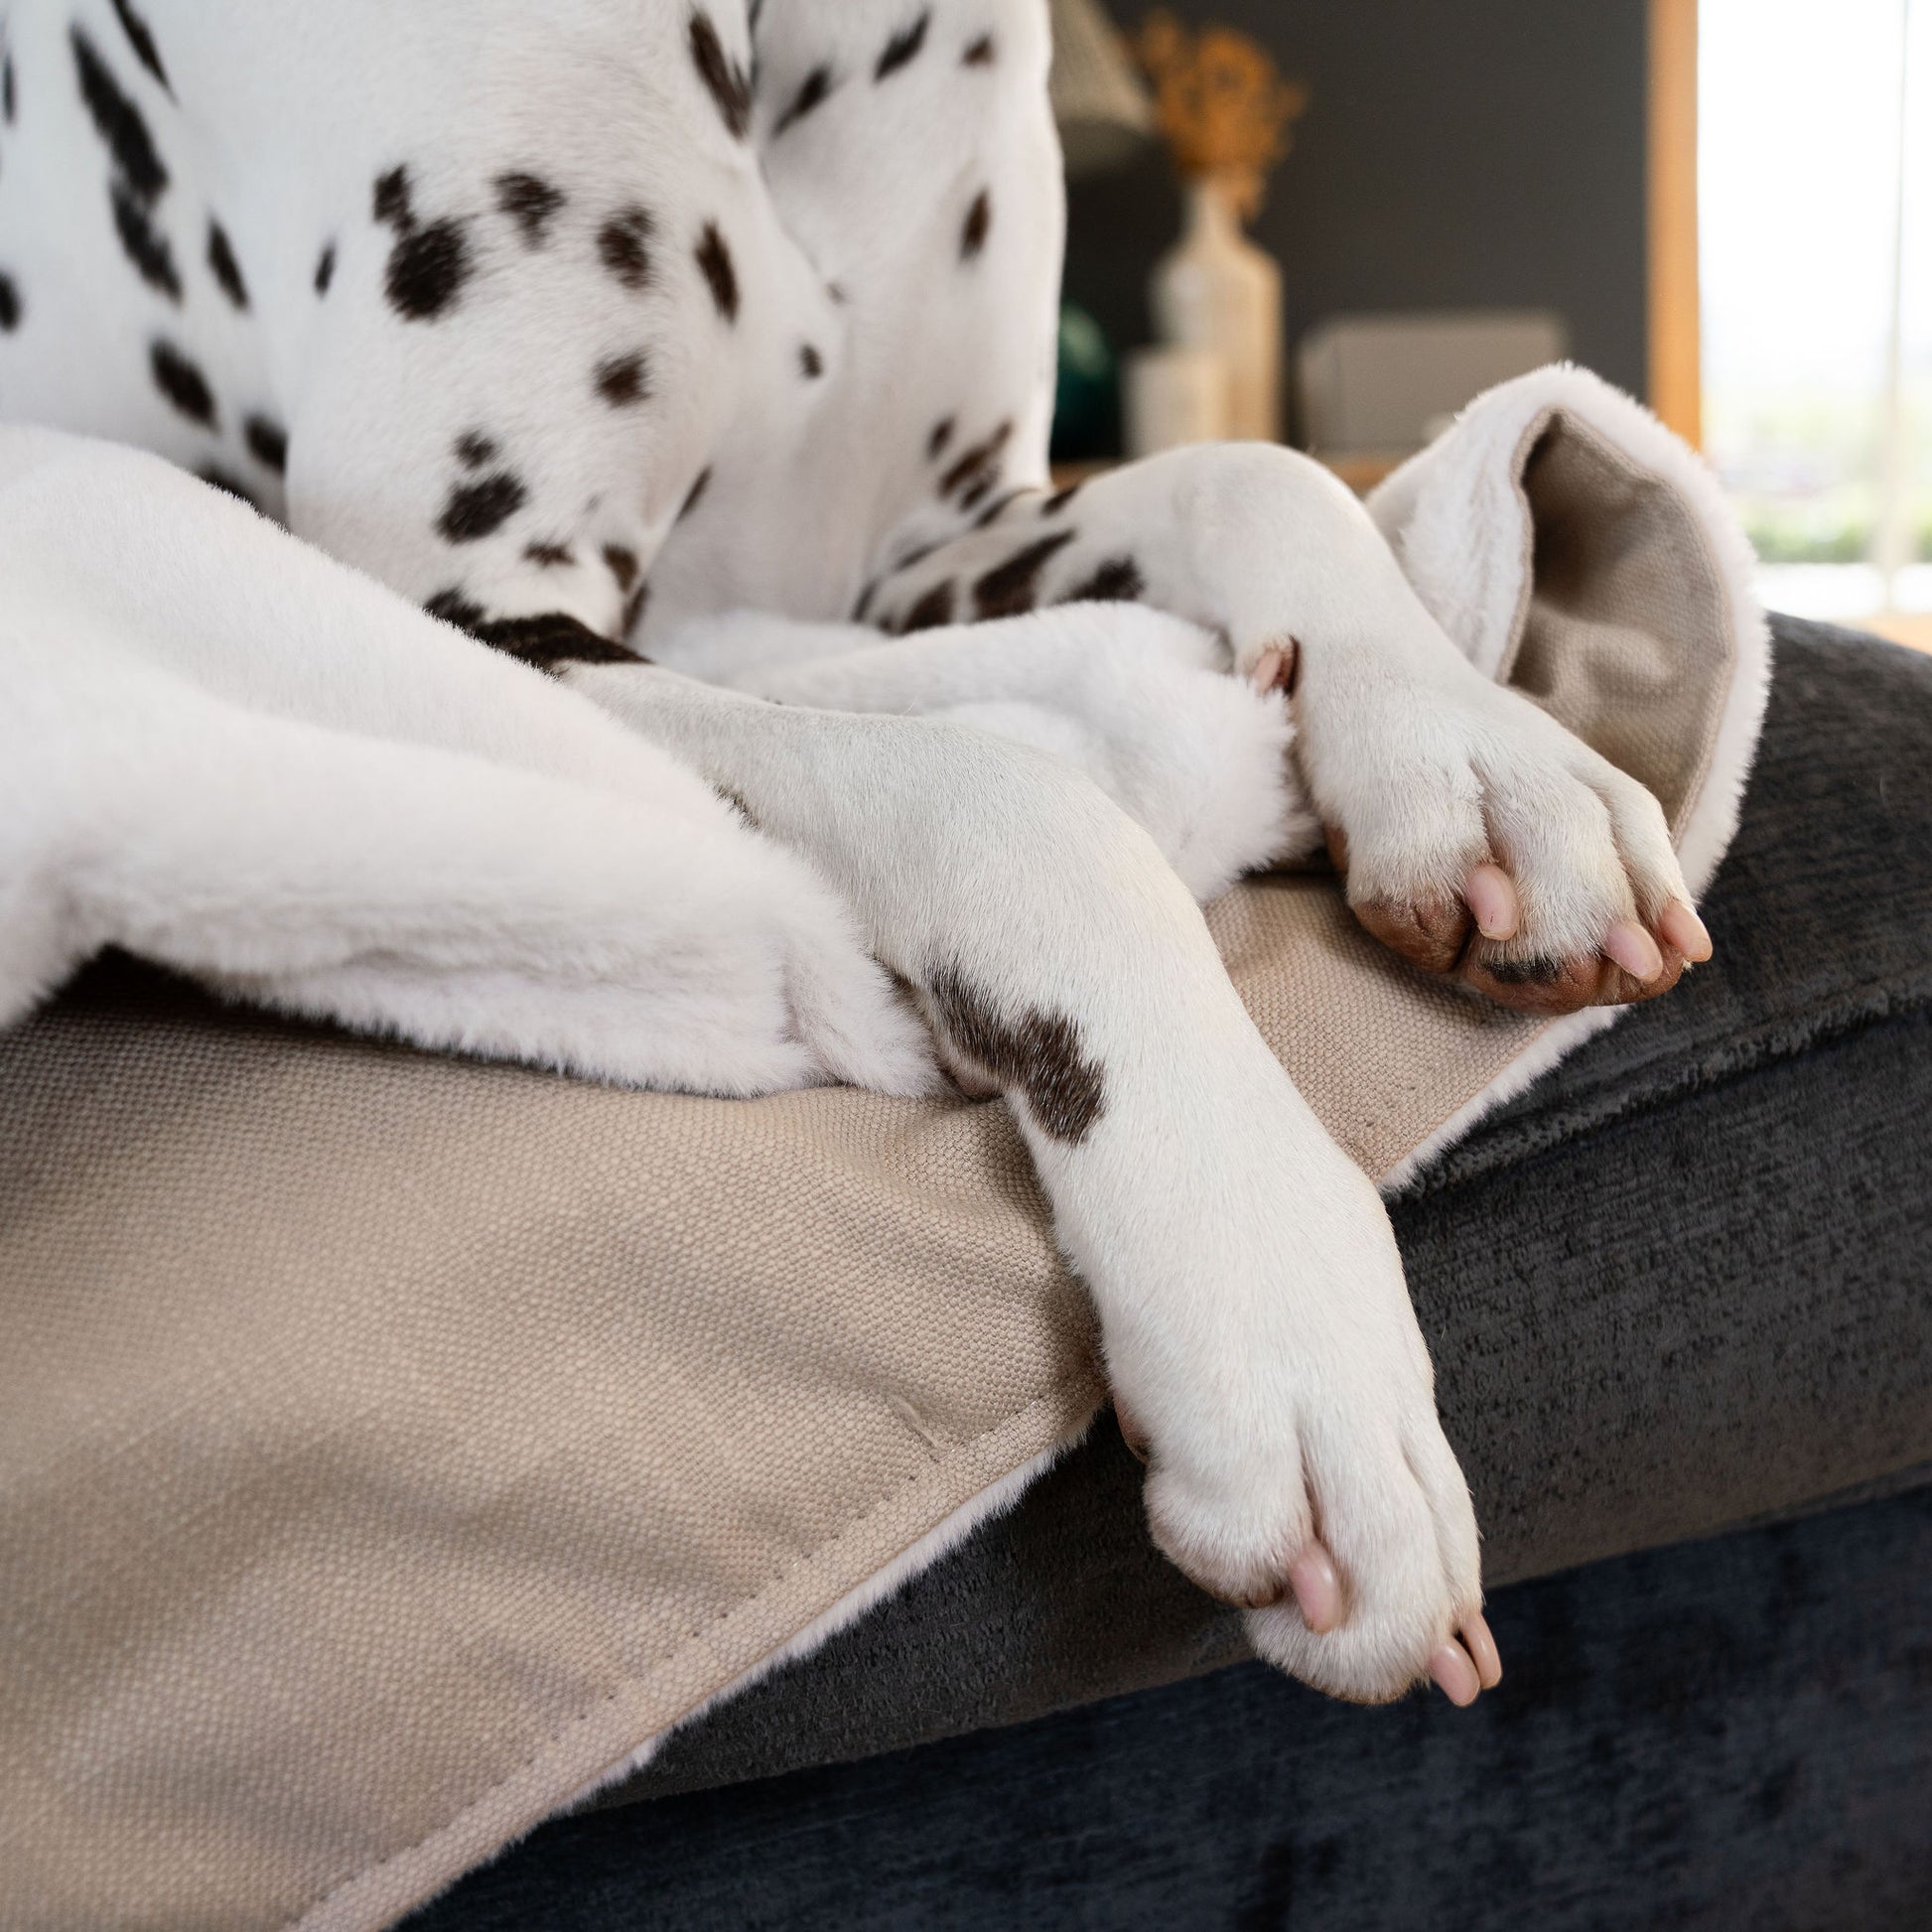 Discover Our Luxurious Savanna Oatmeal Dog Blanket With Super Soft Sherpa & Teddy Fleece, The Perfect Blanket For Puppies, Available To Personalize And In 2 Sizes Here at Lords & Labradors US